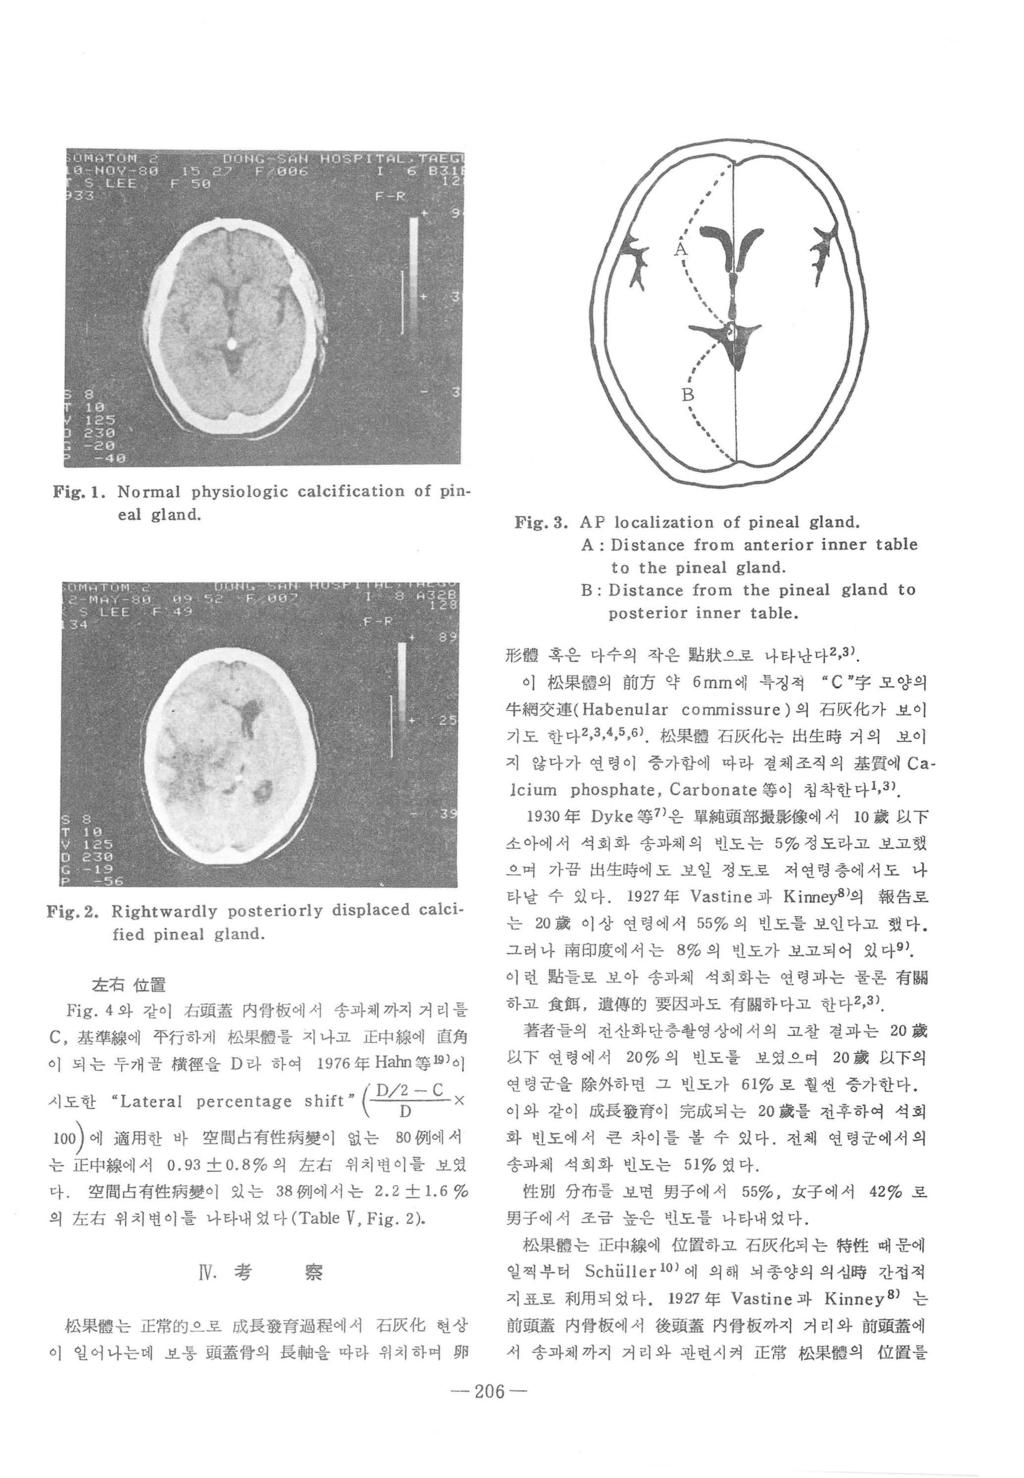 Fig. 1. Normal physiologic calcification of pineal gland. Fig.3. AP localization of pineal gland. A: Distance from anterior inner table to the pineal gland.